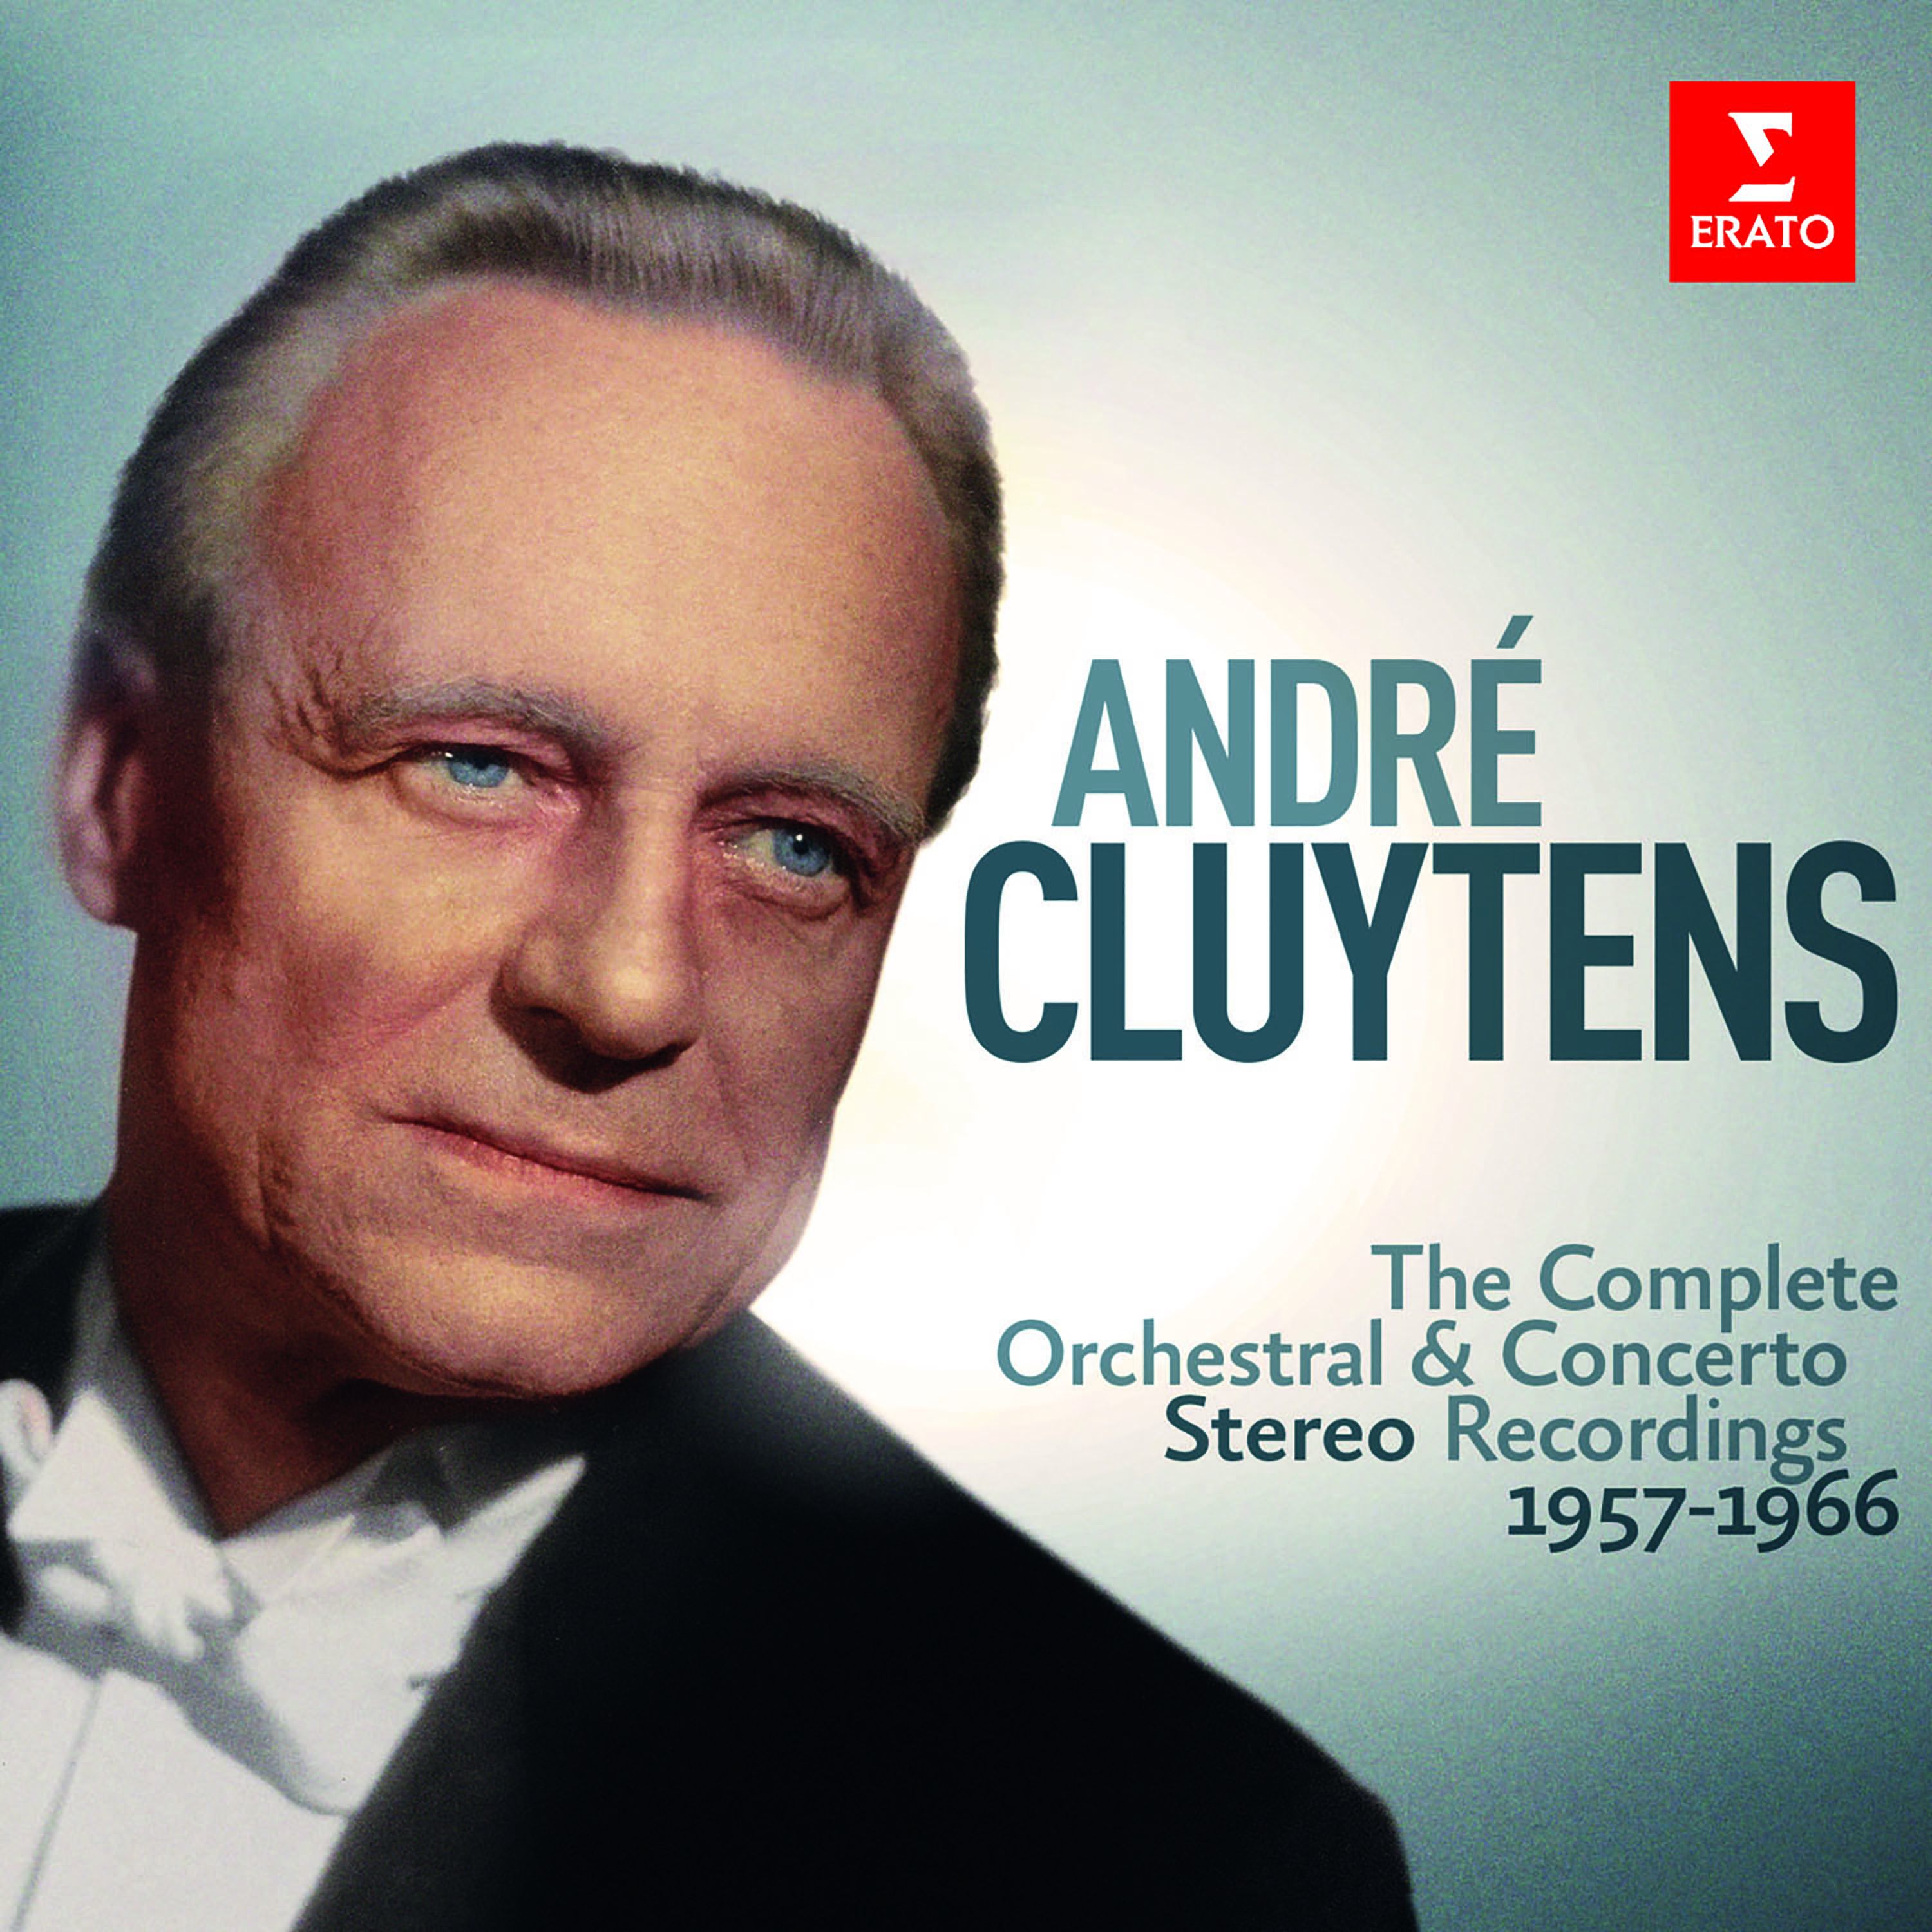 Andre Cluytens  Complete Stereo Orchestral Recordings, 19571966